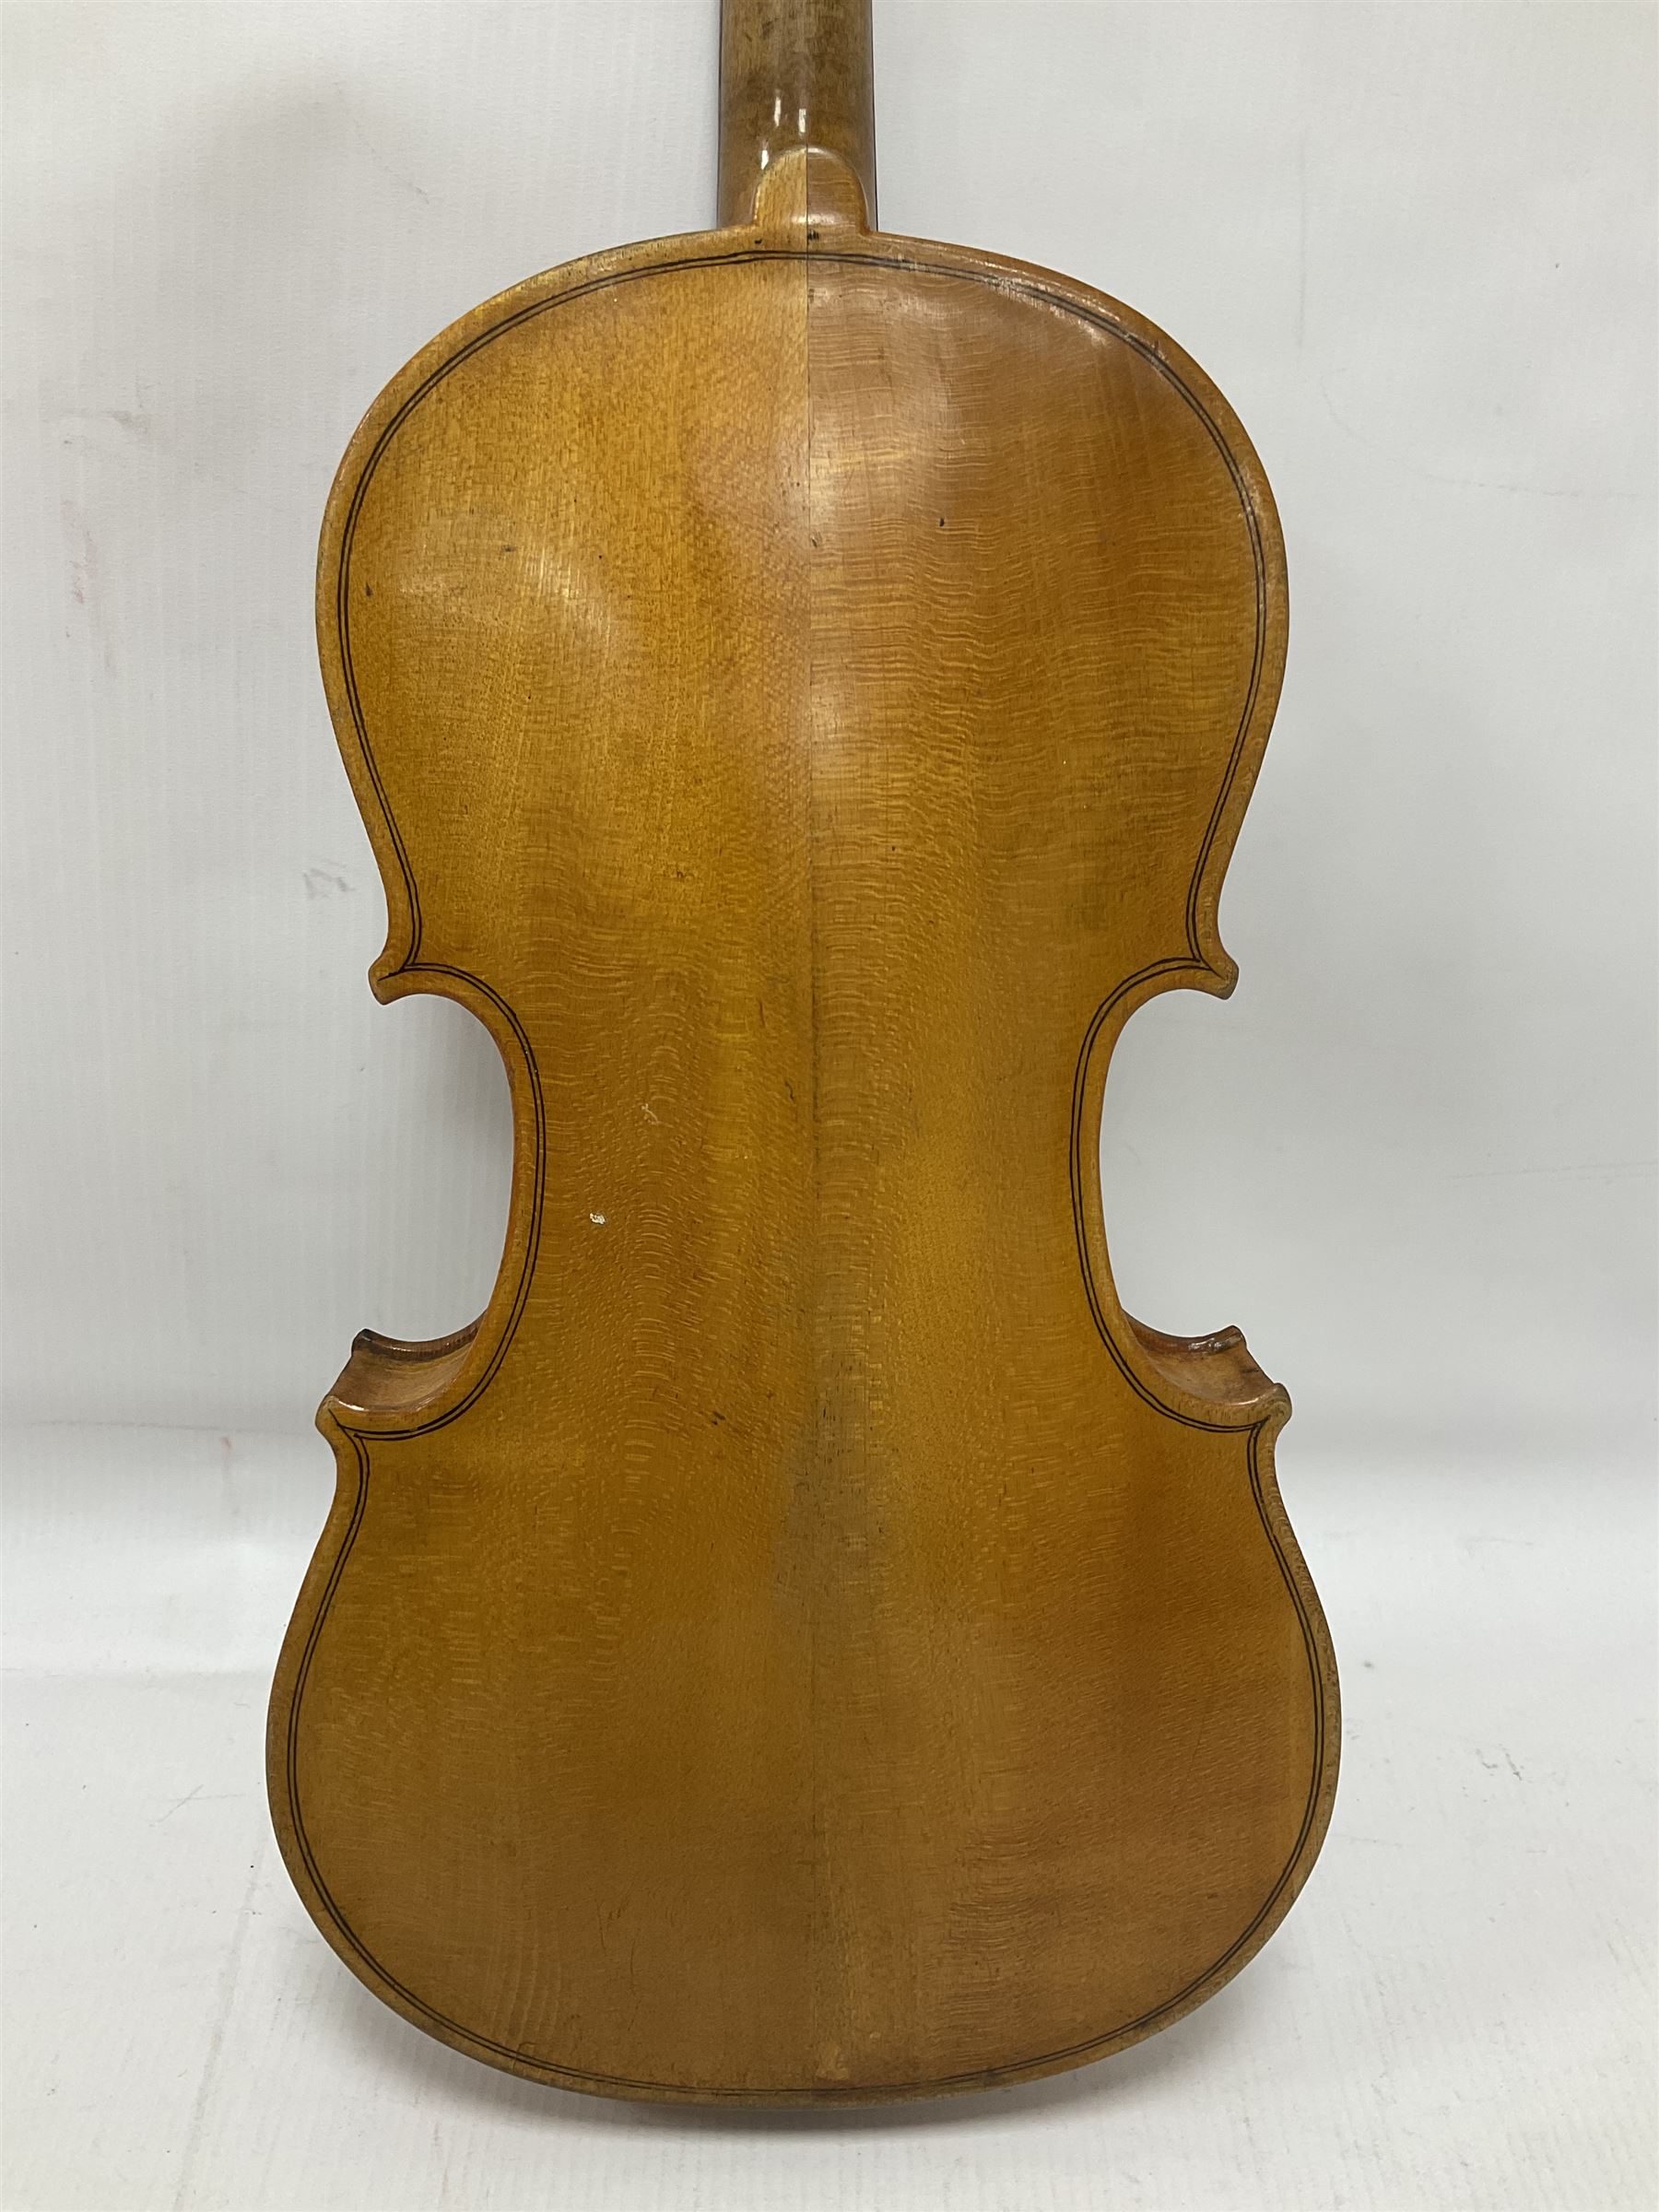 19th century 3/4 size violin in its original fitted wooden “coffin case” Overall length 53cm No bow - Image 11 of 16